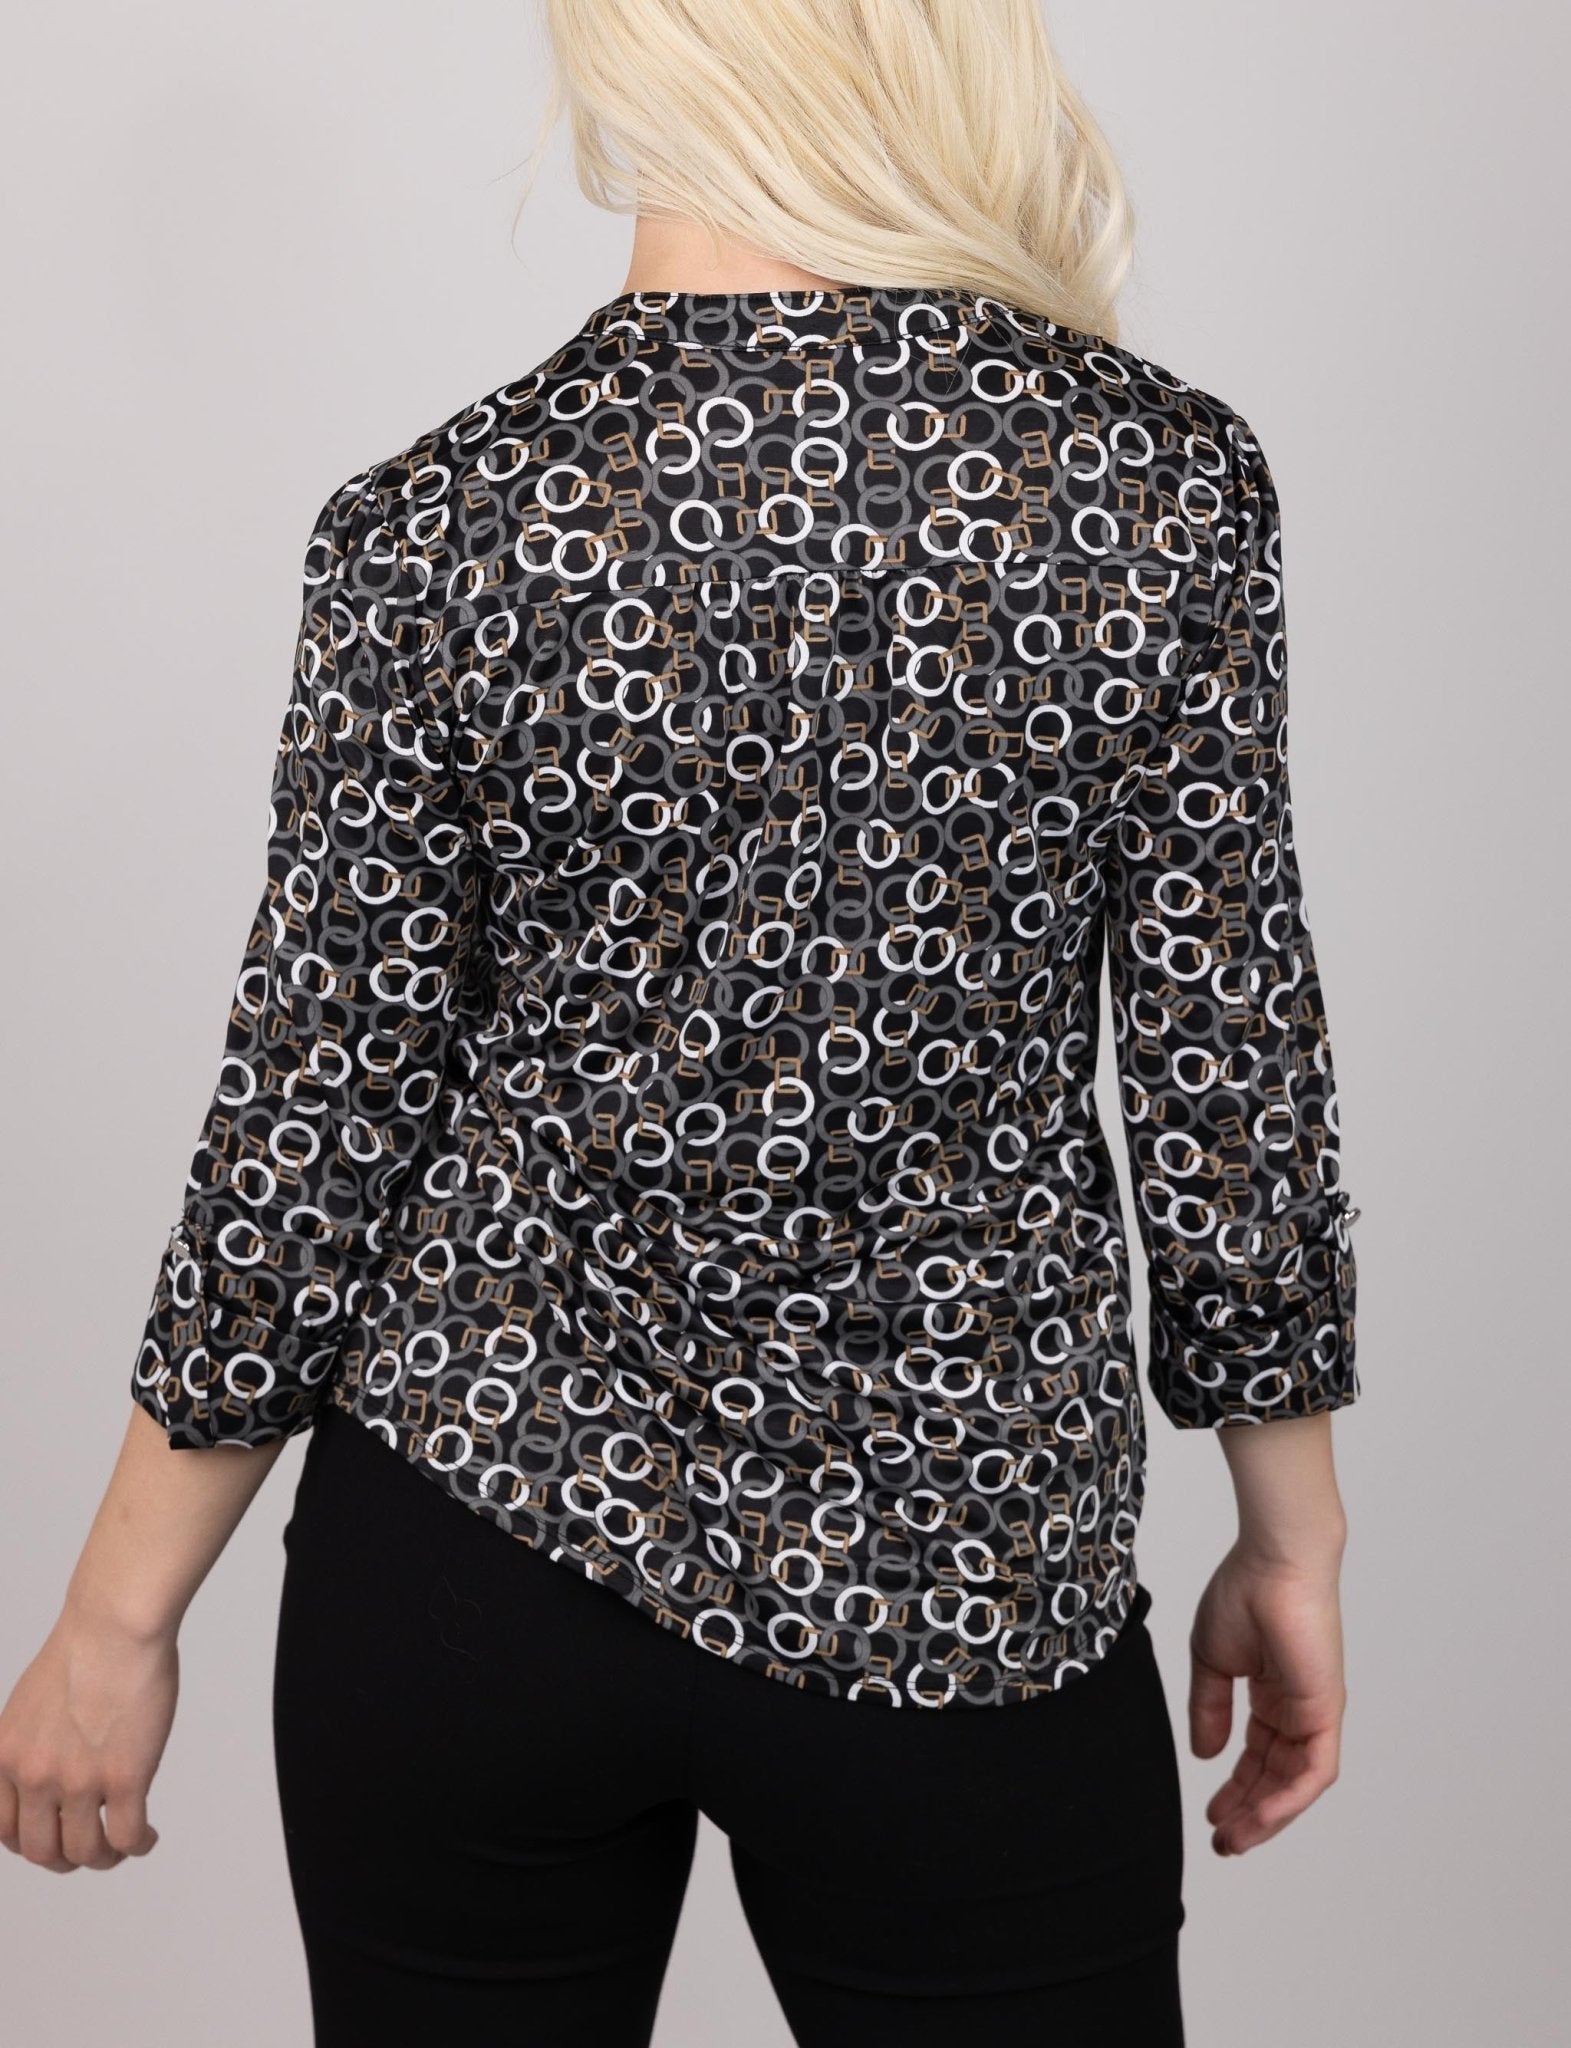 Cocomo Printed Popover with Pockets - DressbarnClothing